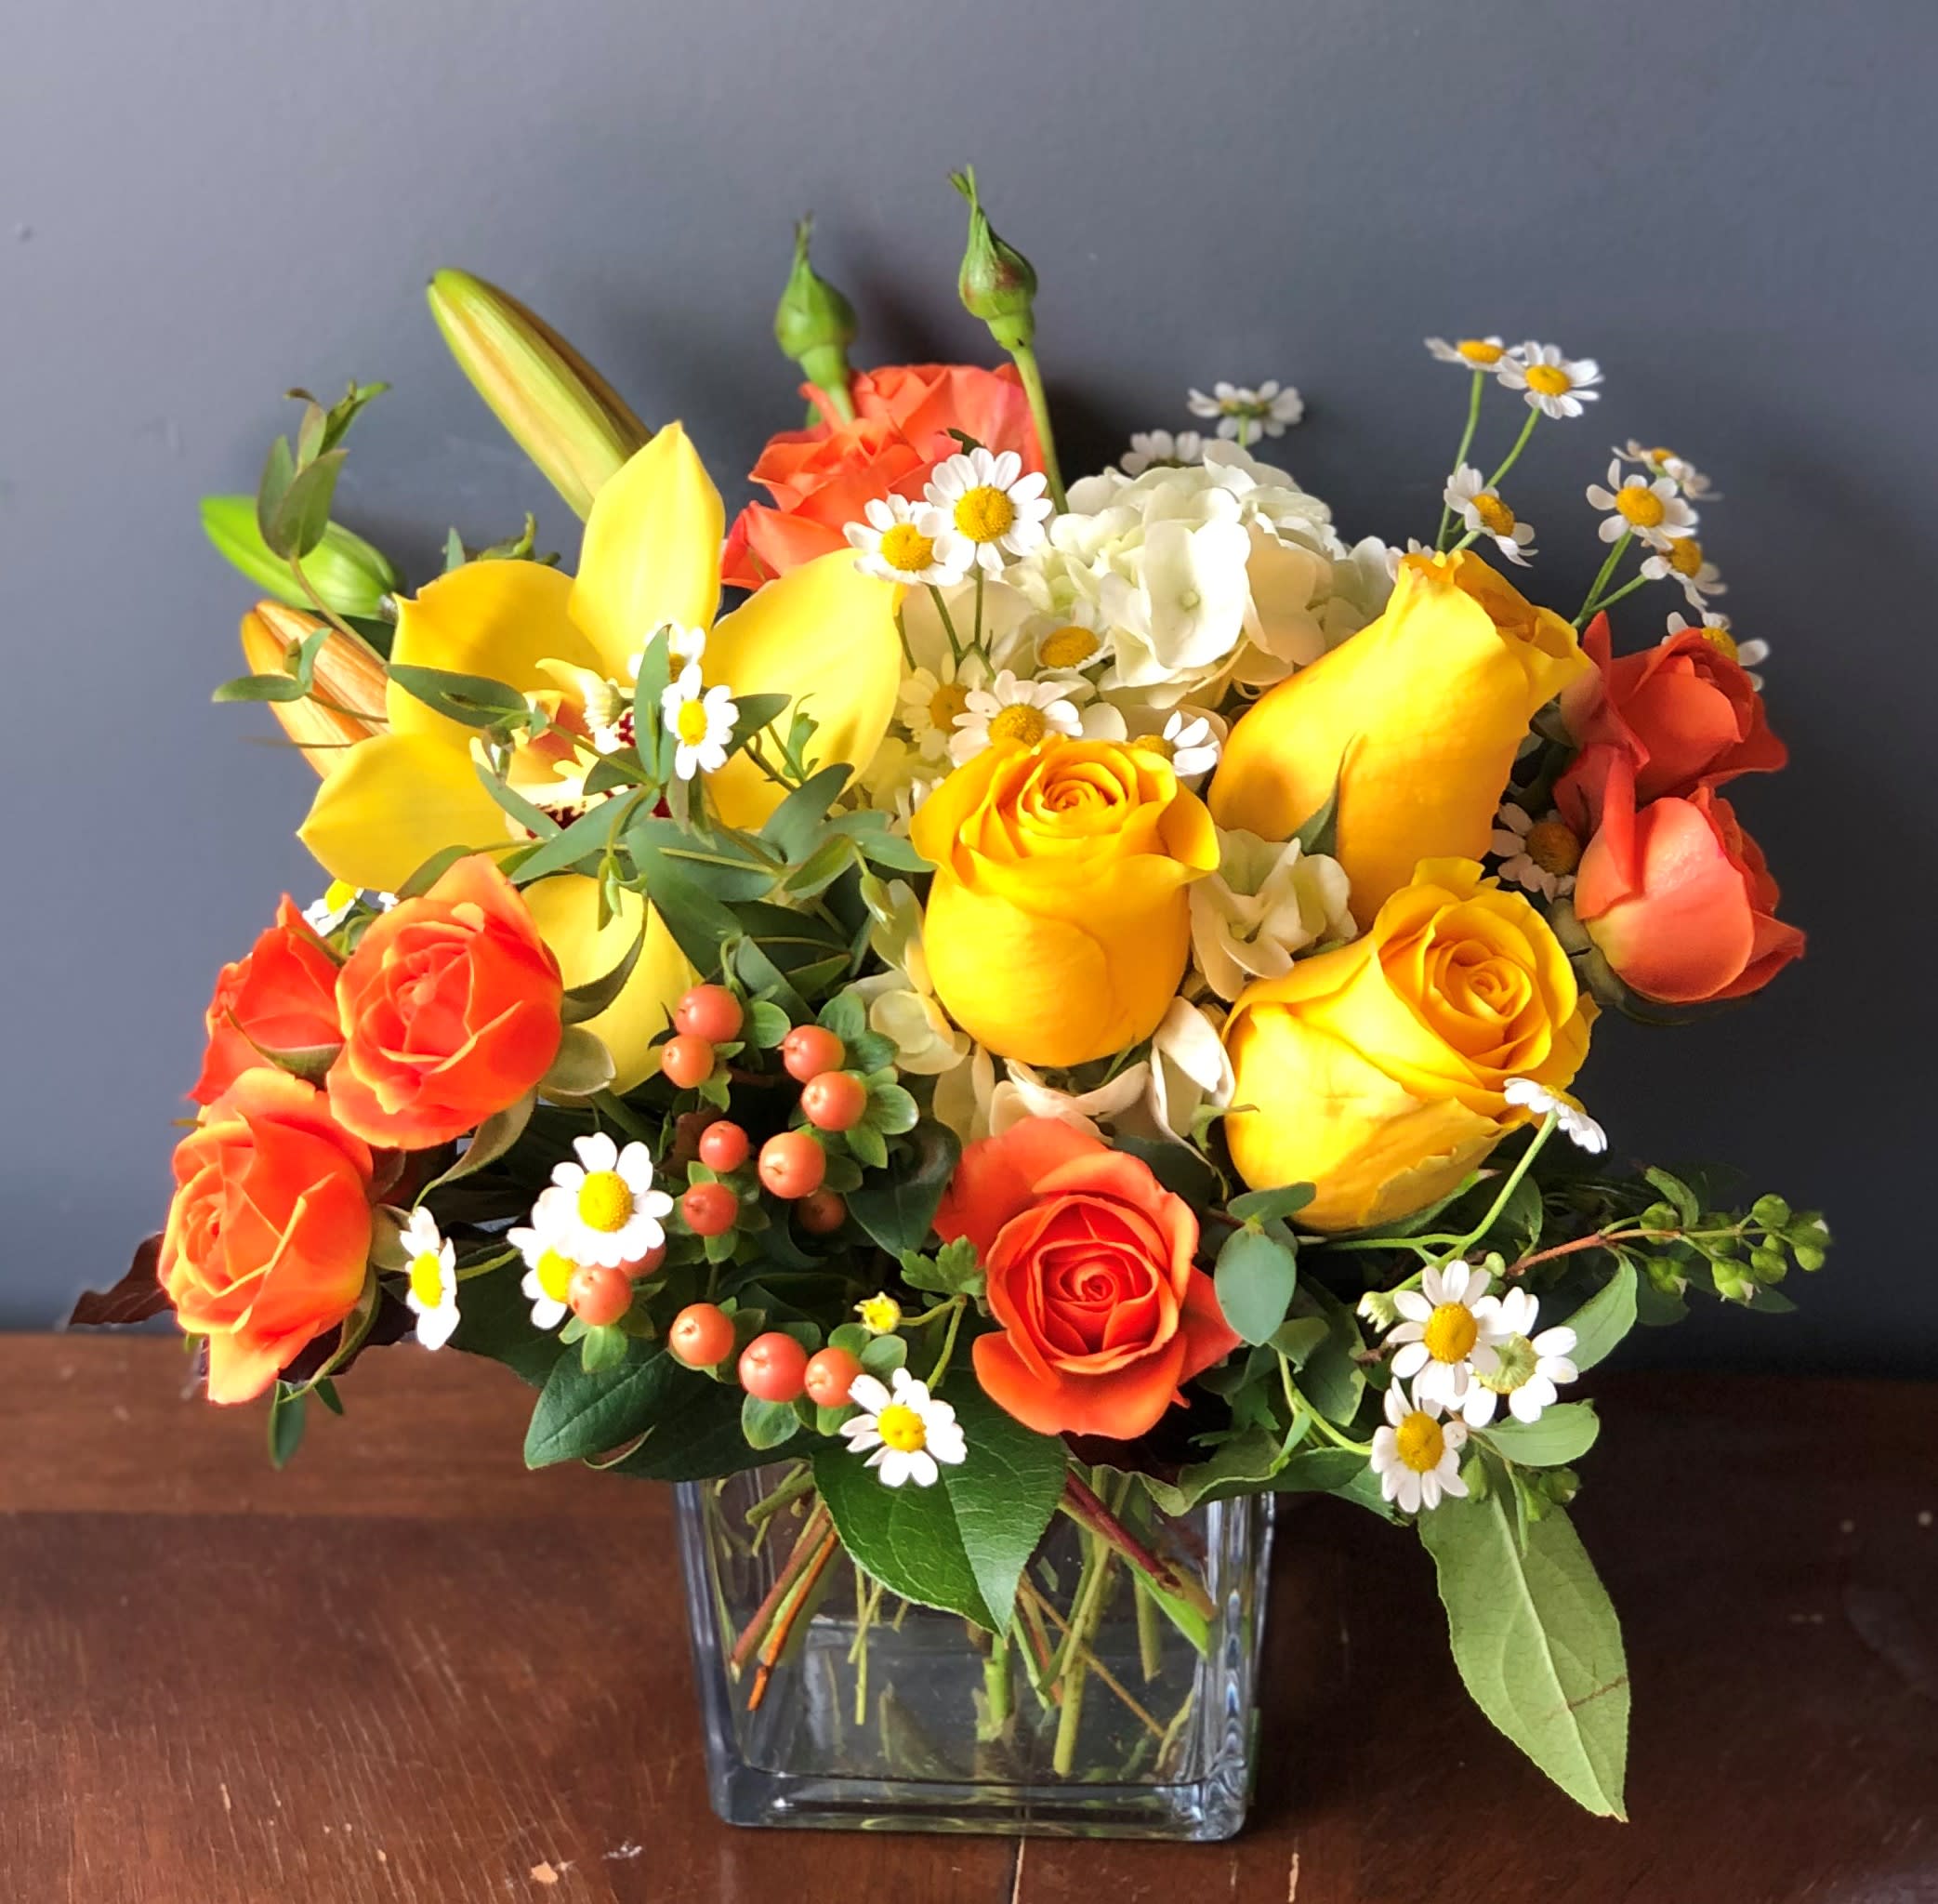 Citrine - This fresh squeezed, burst of oranges and yellows brings a burst of color to your favorite seasonal arrangement!